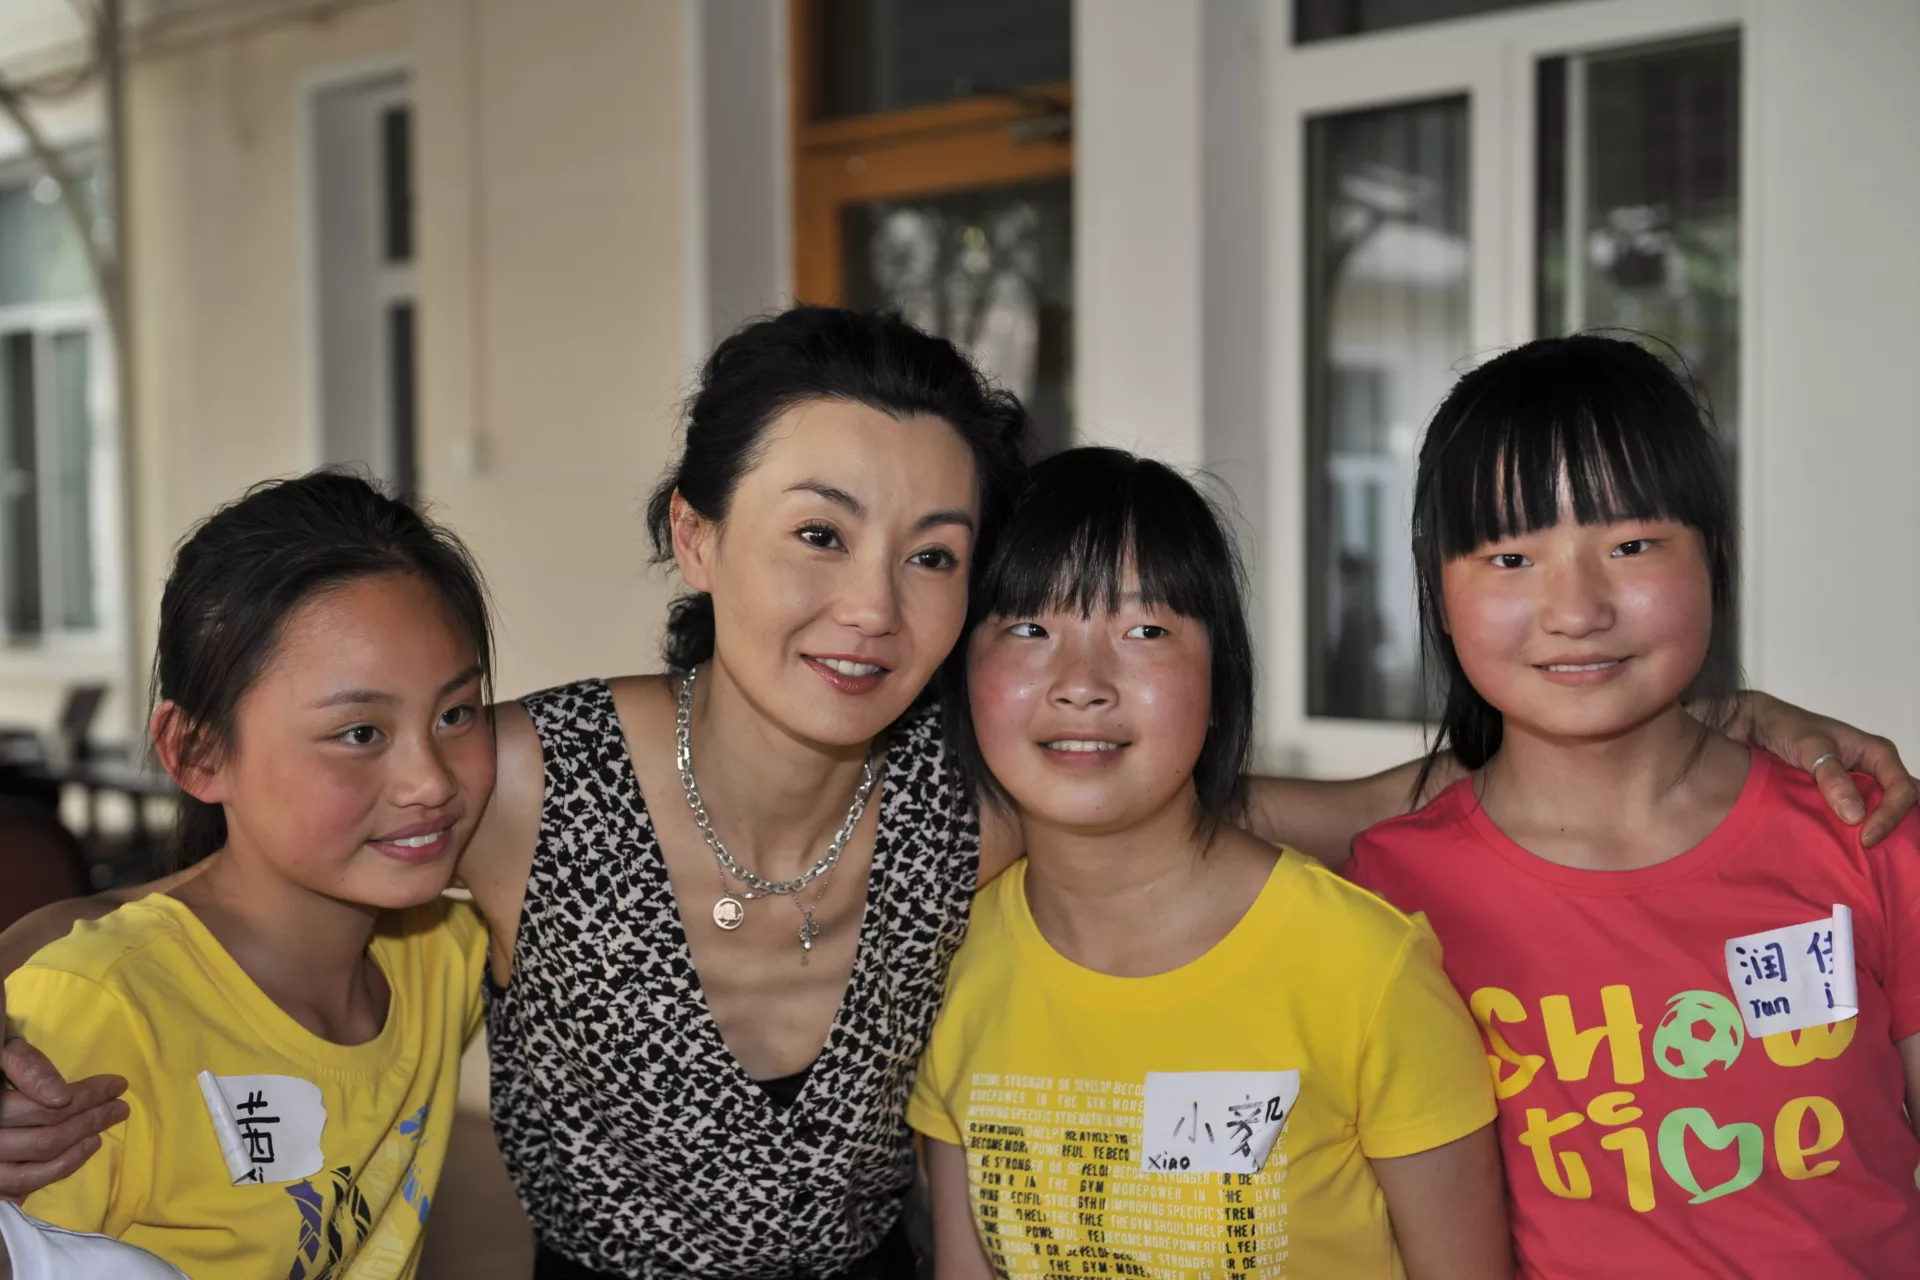 Maggie Cheung and the young presenters, including Xi-xi (far left).